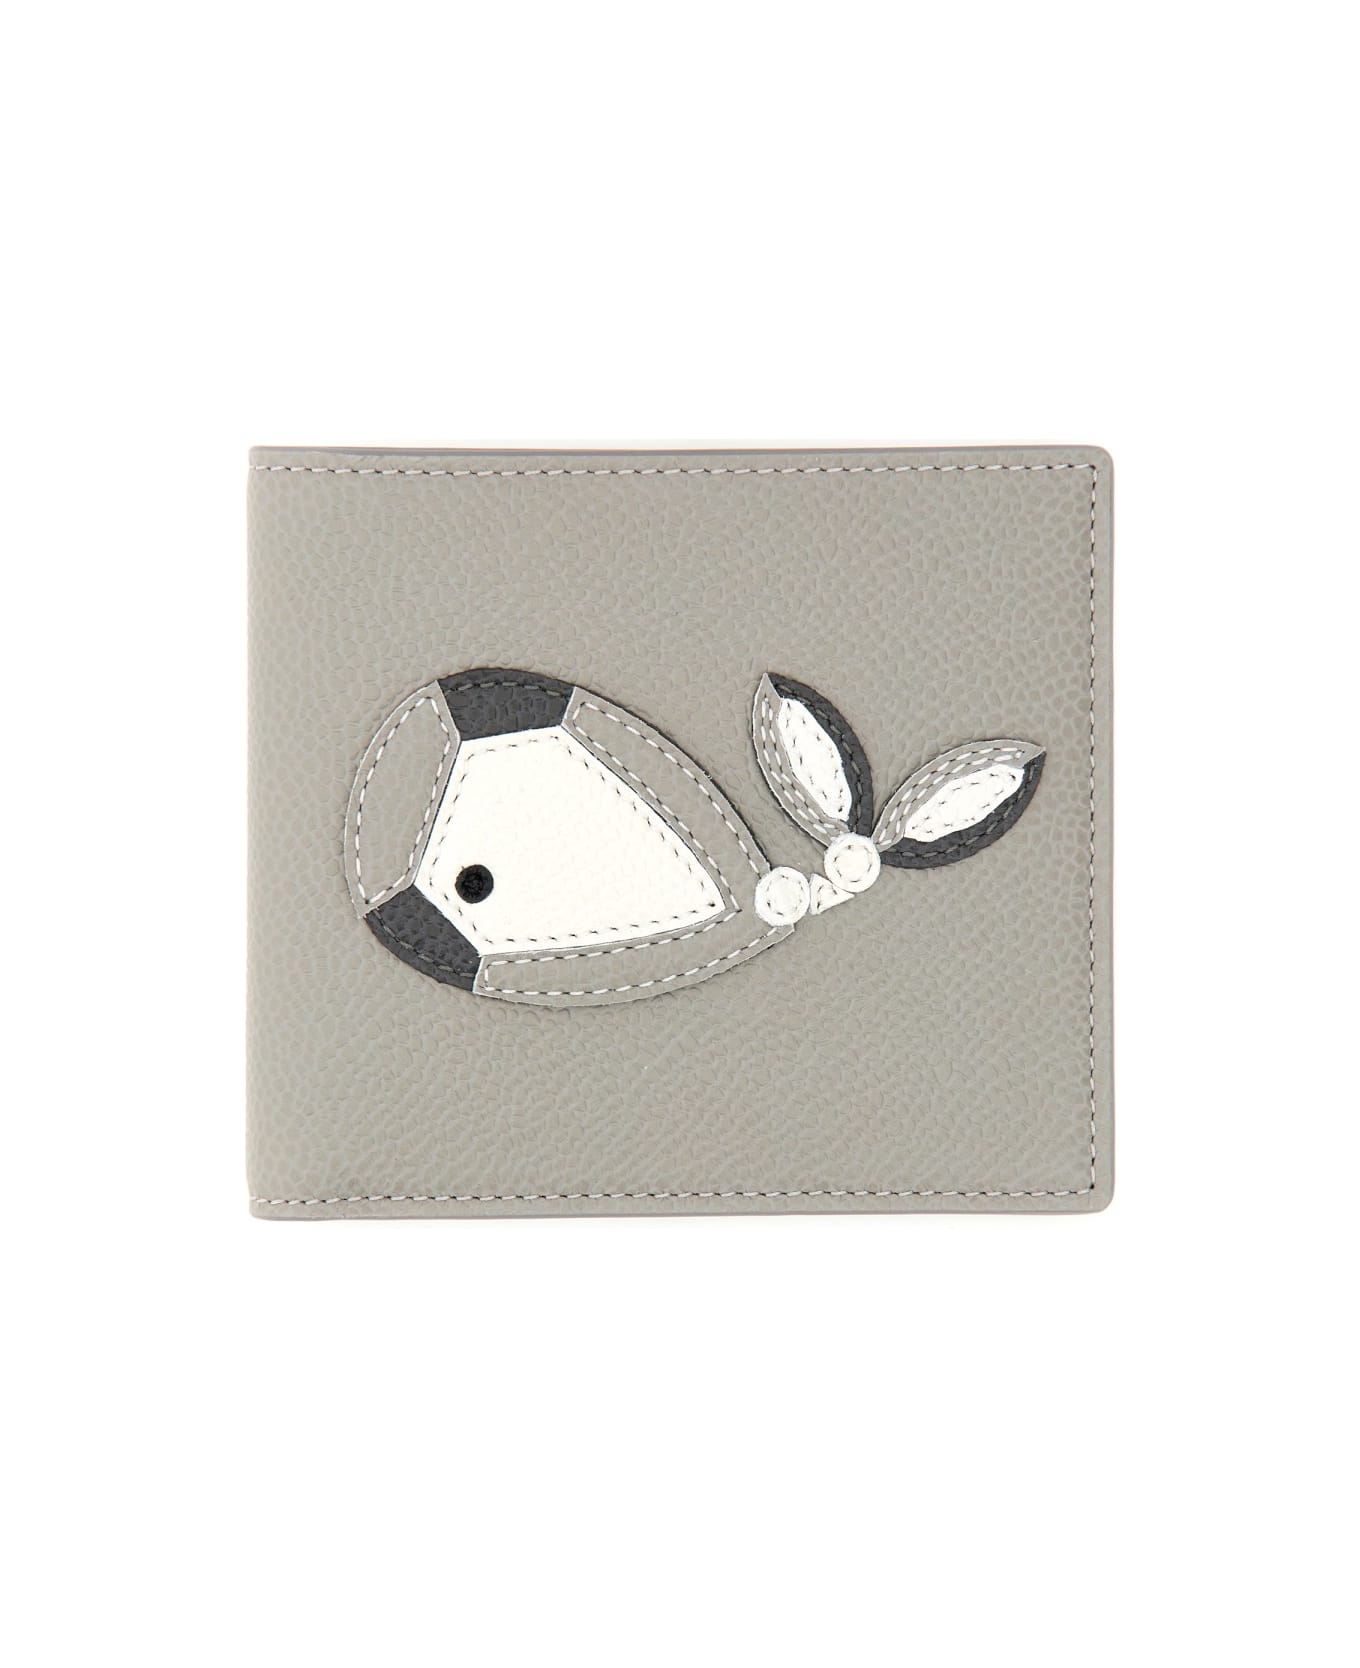 Thom Browne Wallet With Whale Application - GREY 財布